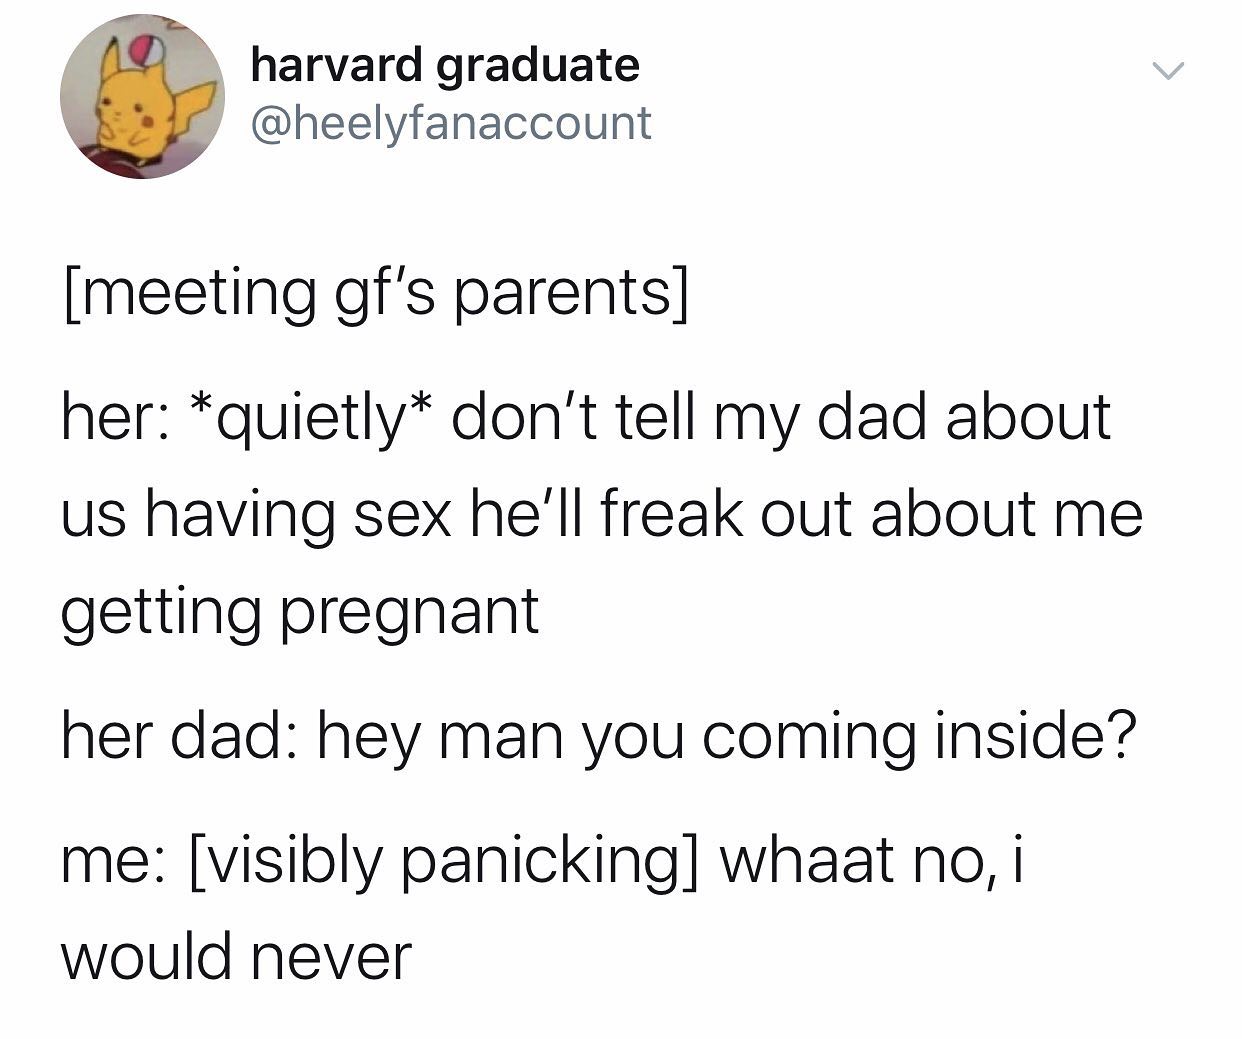 angle - harvard graduate meeting gf's parents her quietly don't tell my dad about us having sex he'll freak out about me getting pregnant her dad hey man you coming inside? me visibly panicking whaat no, i would never